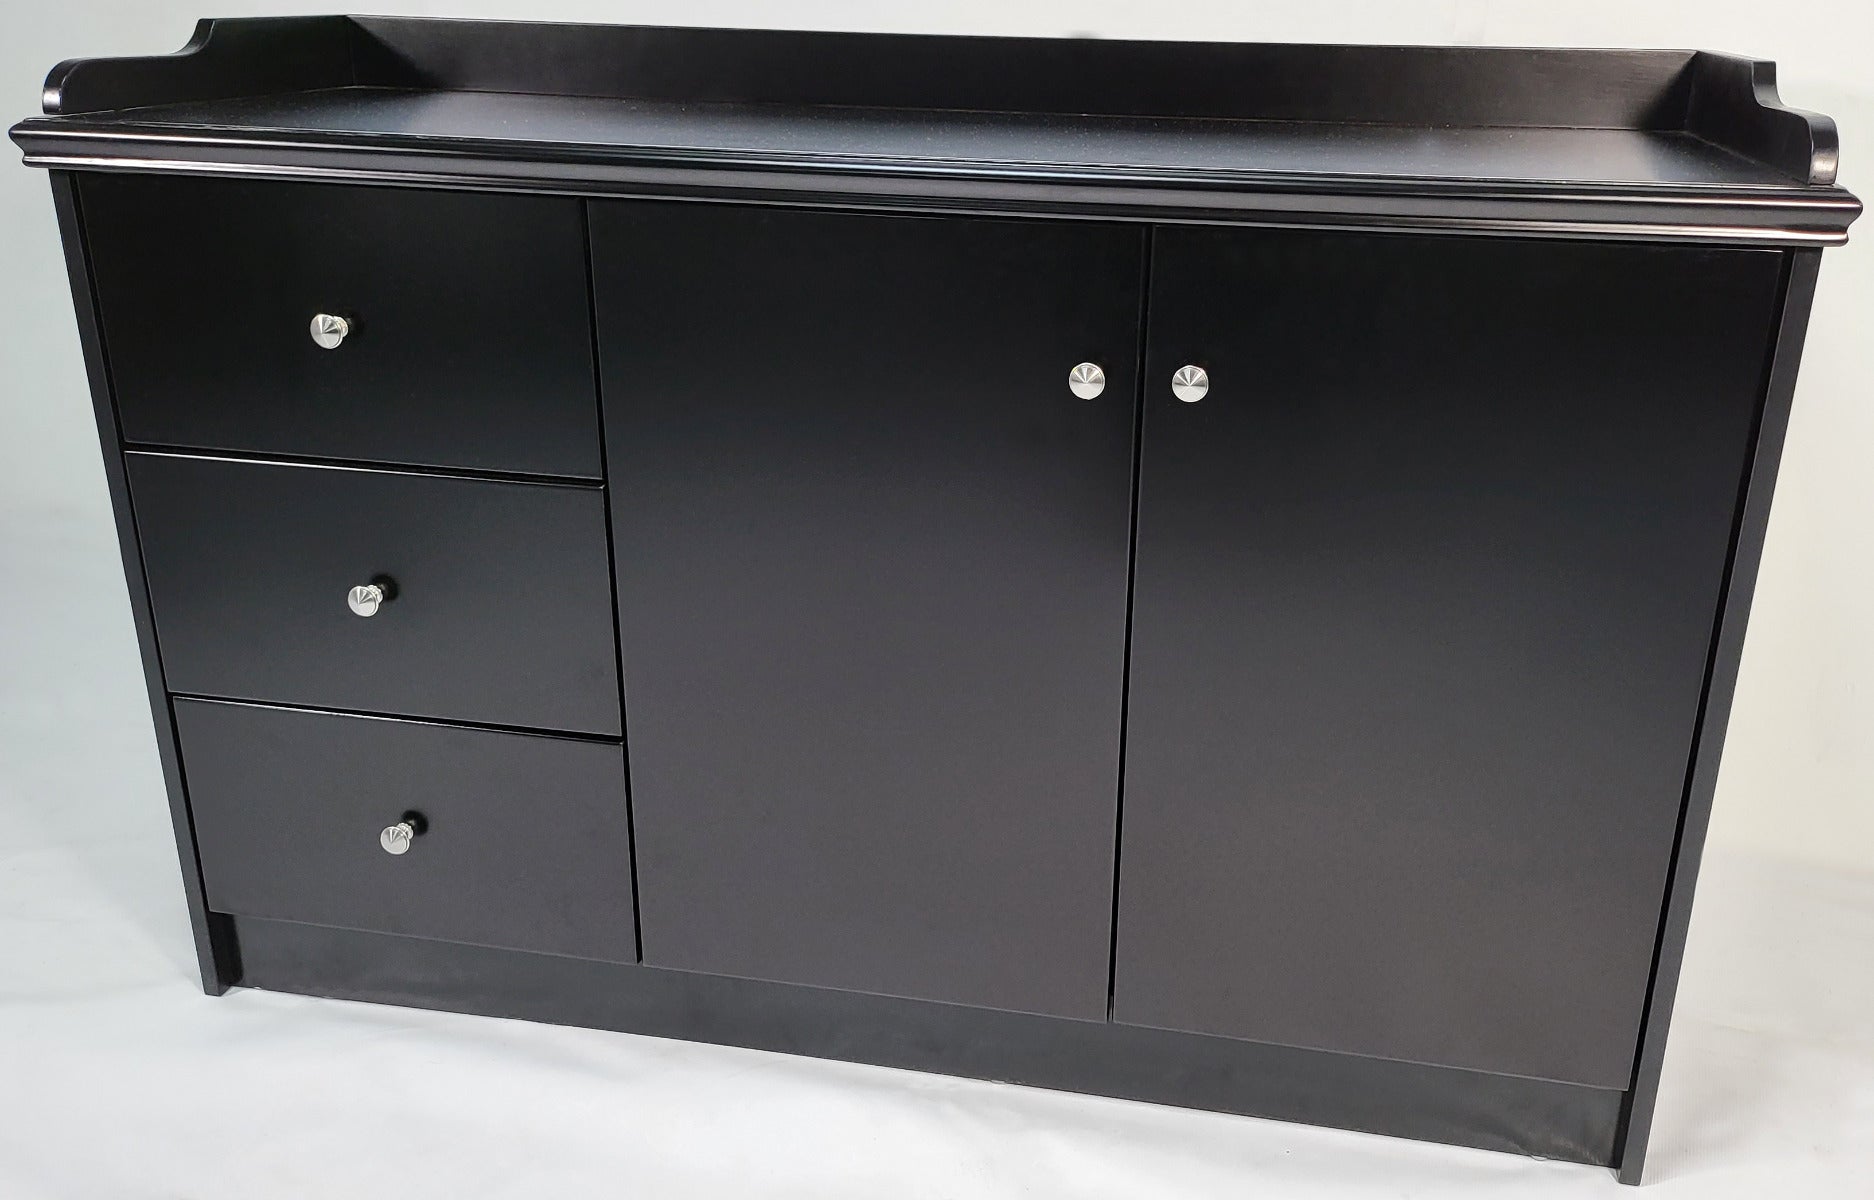 120cm Wide Black Cupboard with Integrated Drawers - 2K01 North Yorkshire